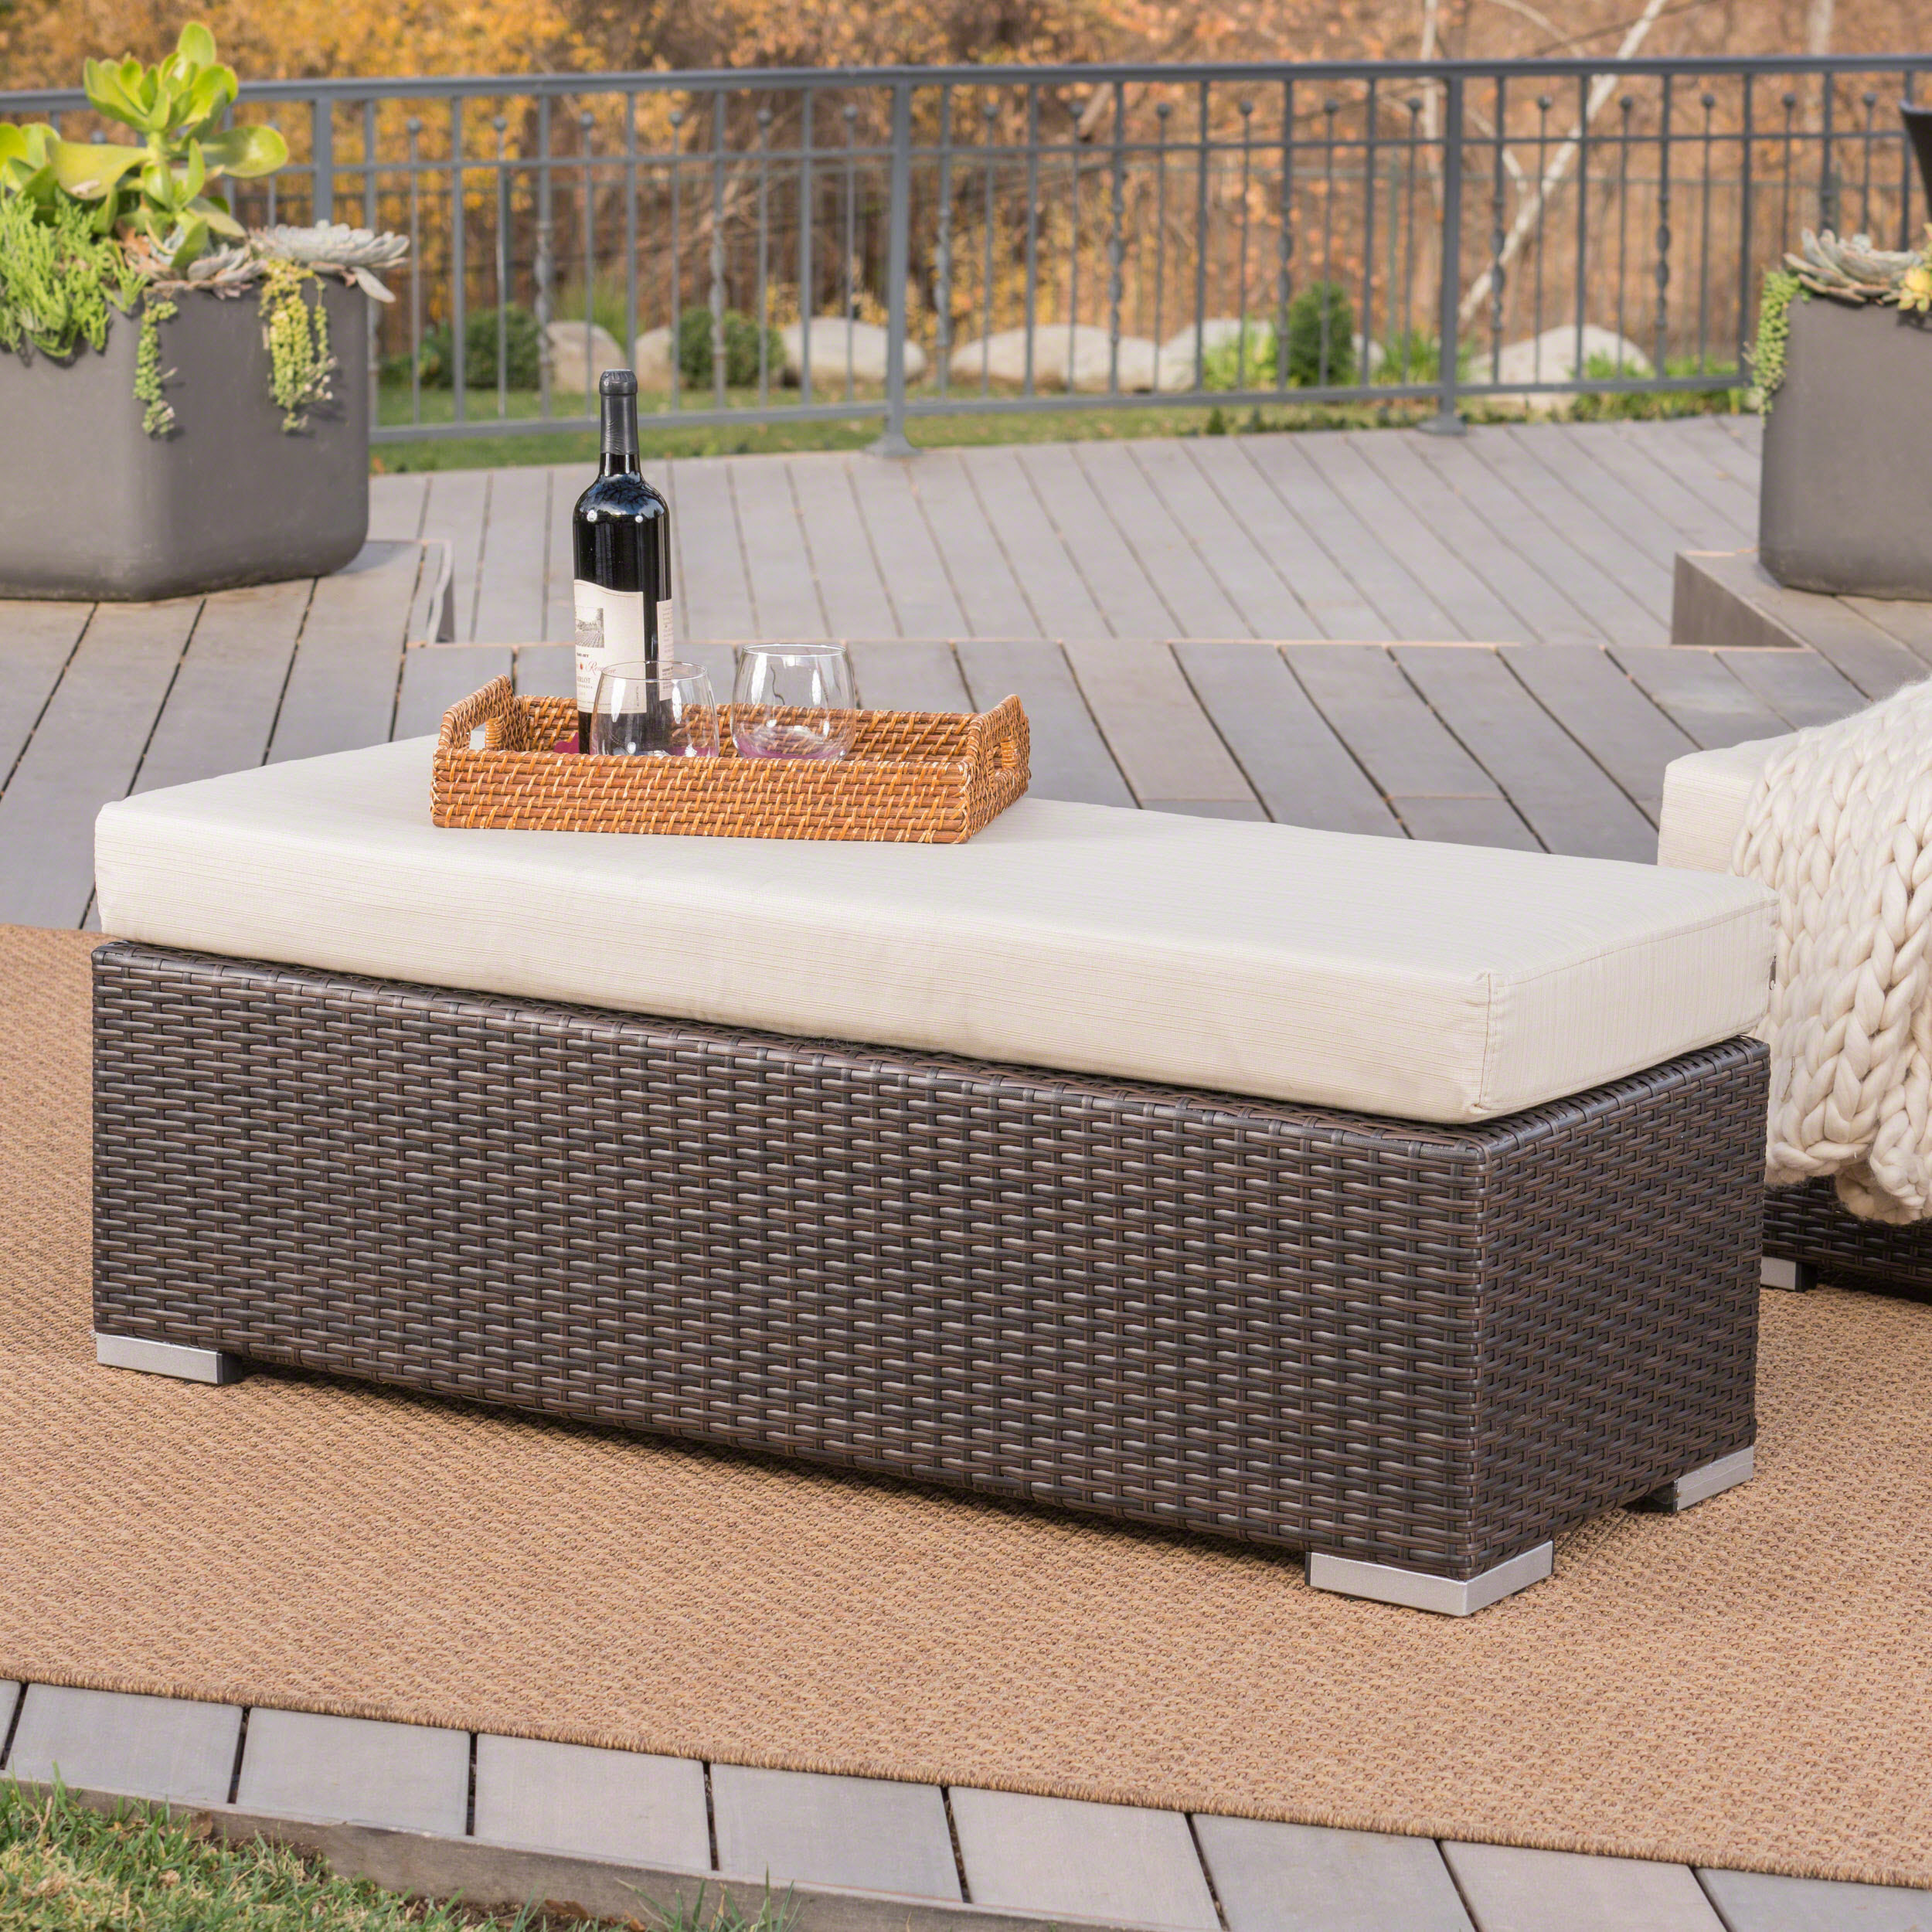 Malibu Outdoor Wicker Bench with Water Resistant Cushion, Multibrown and Beige - image 3 of 7